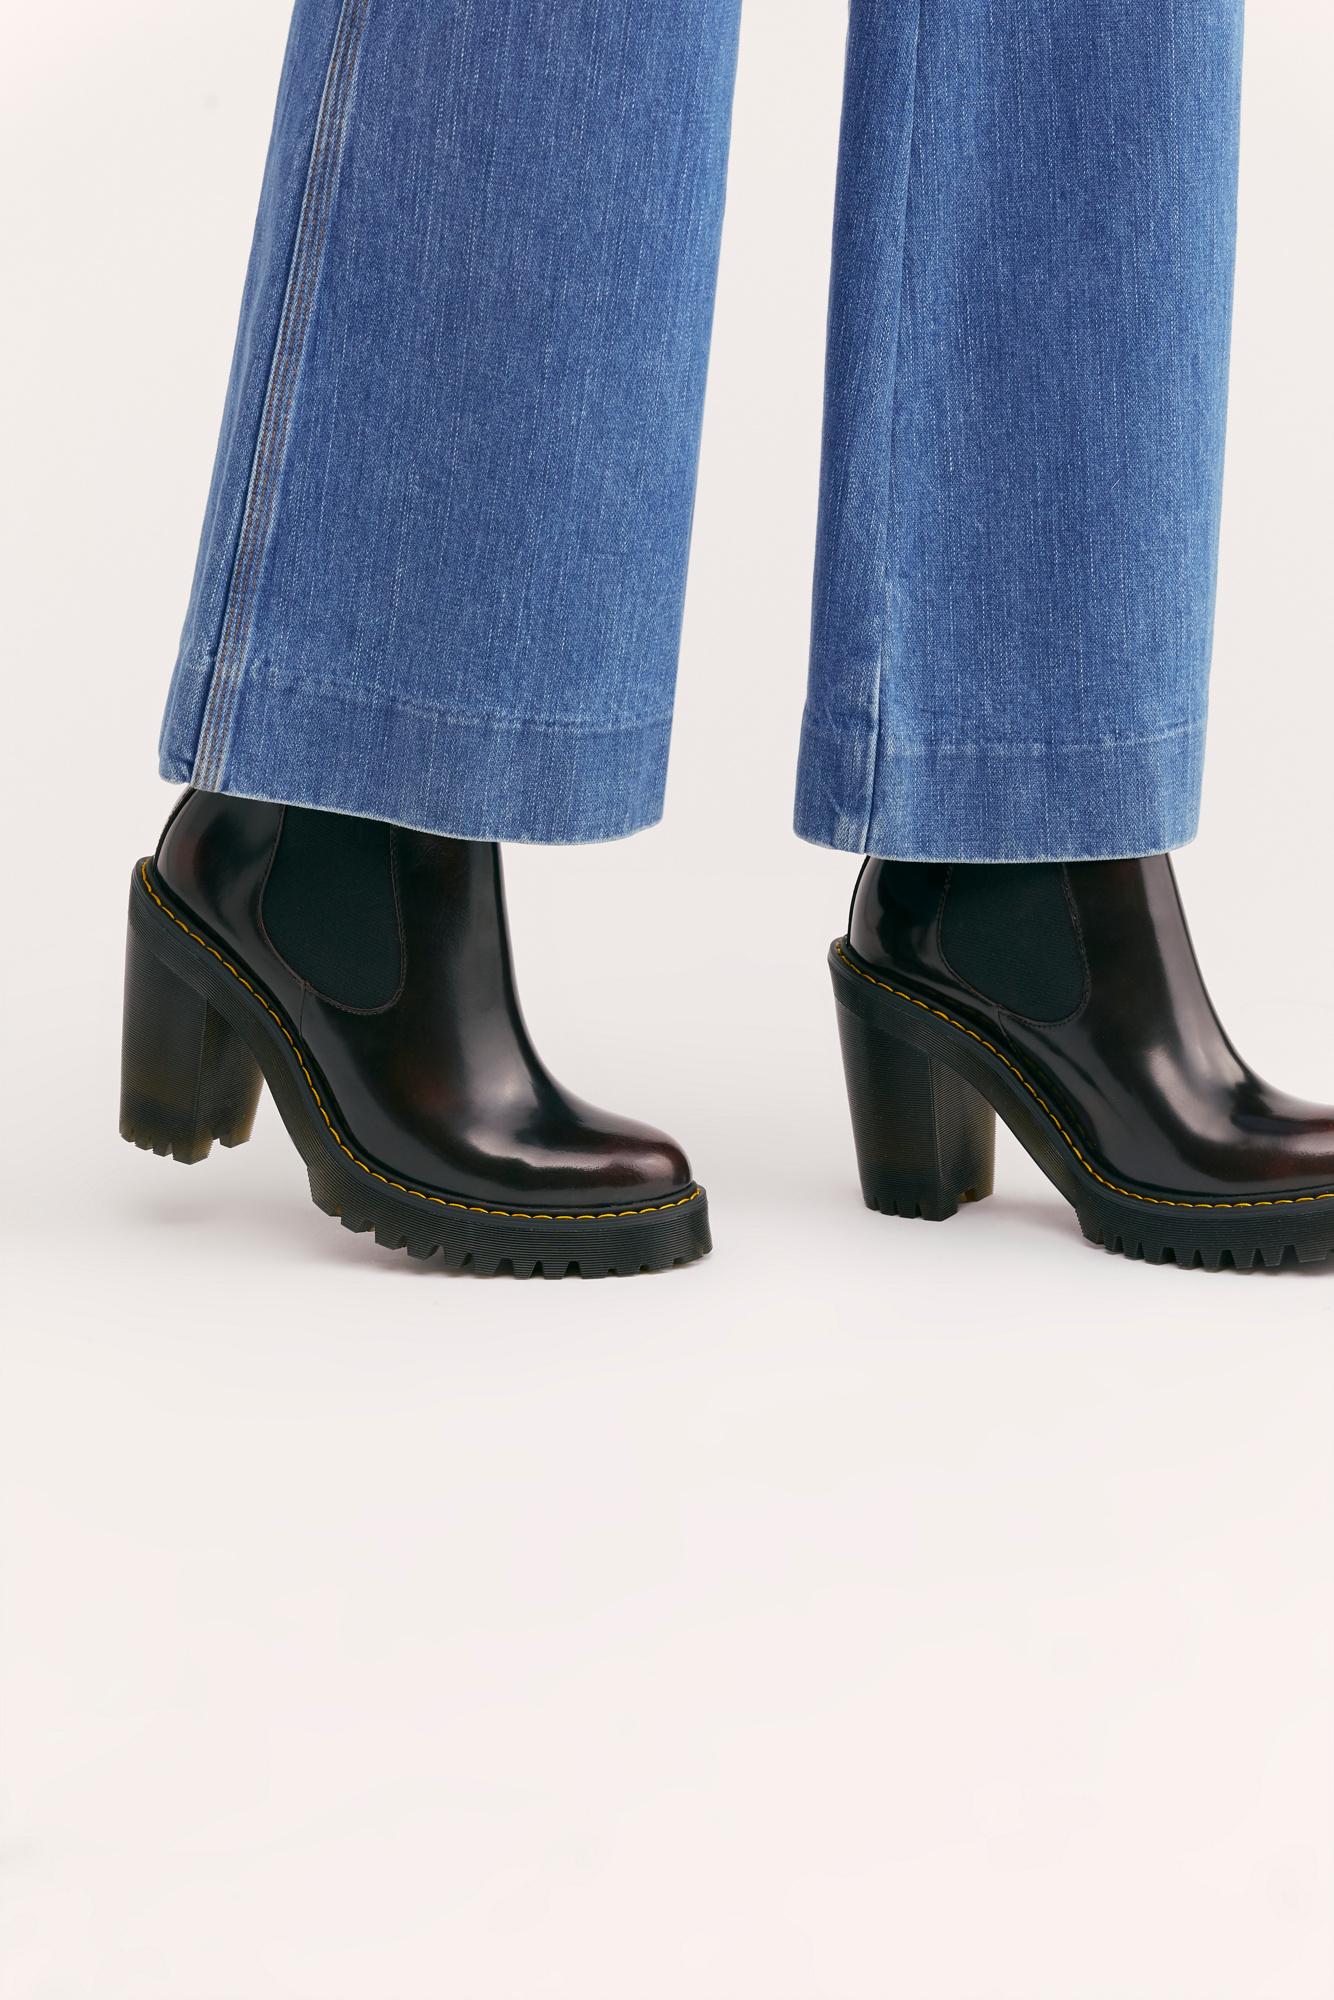 Free People Dr. Martens Hurston Chelsea Boots in Cherry Red (Black) | Lyst